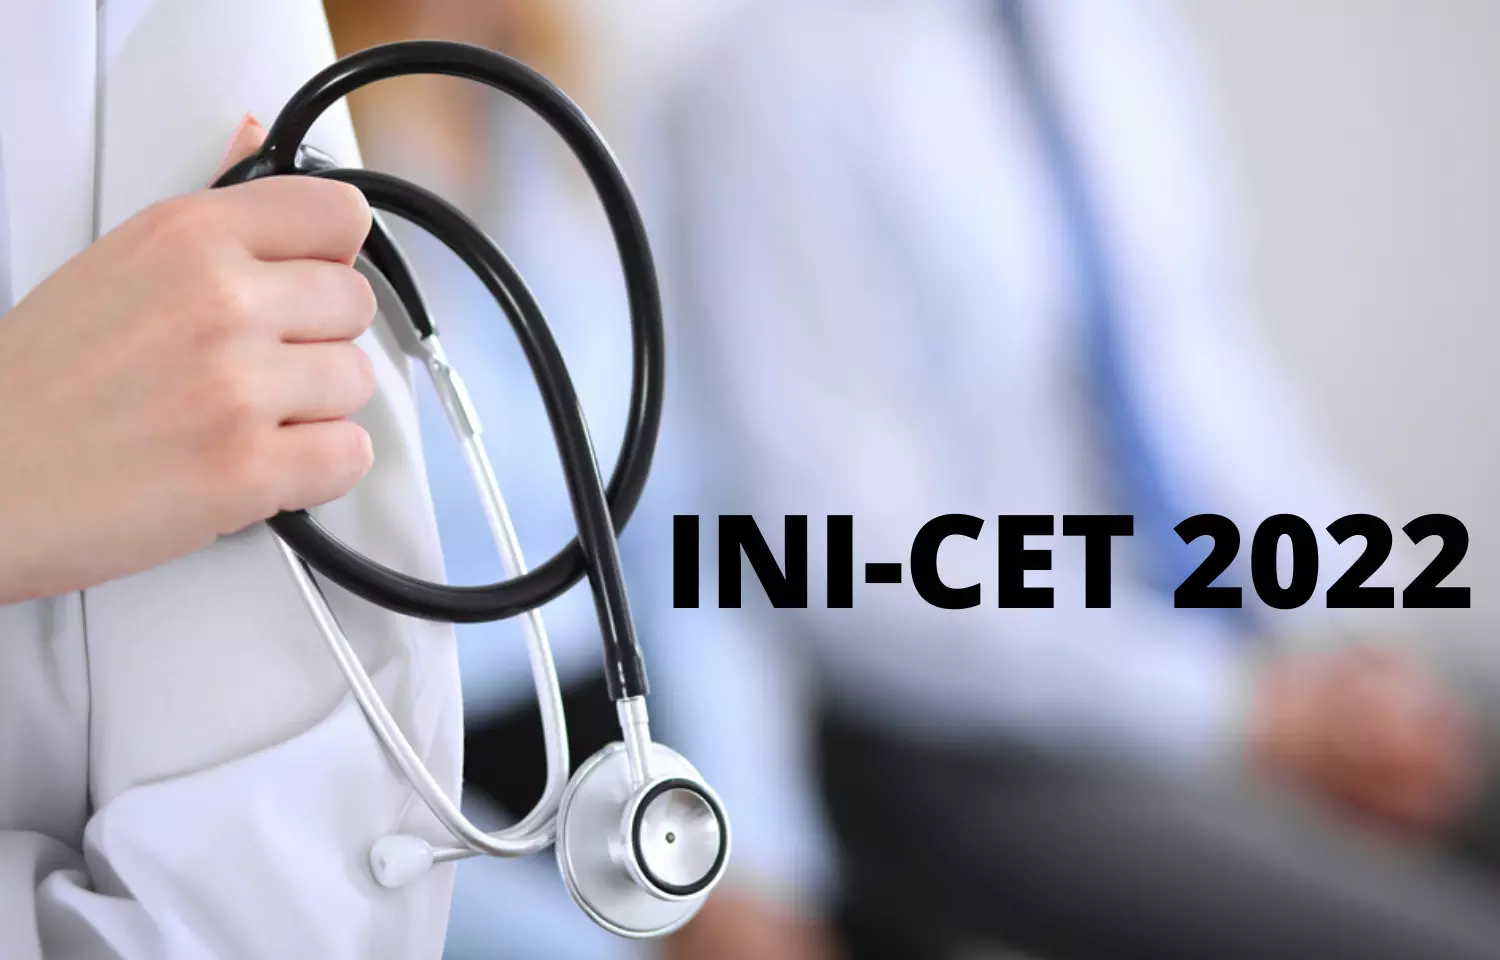 AIIMS invites applications for INICET 2022